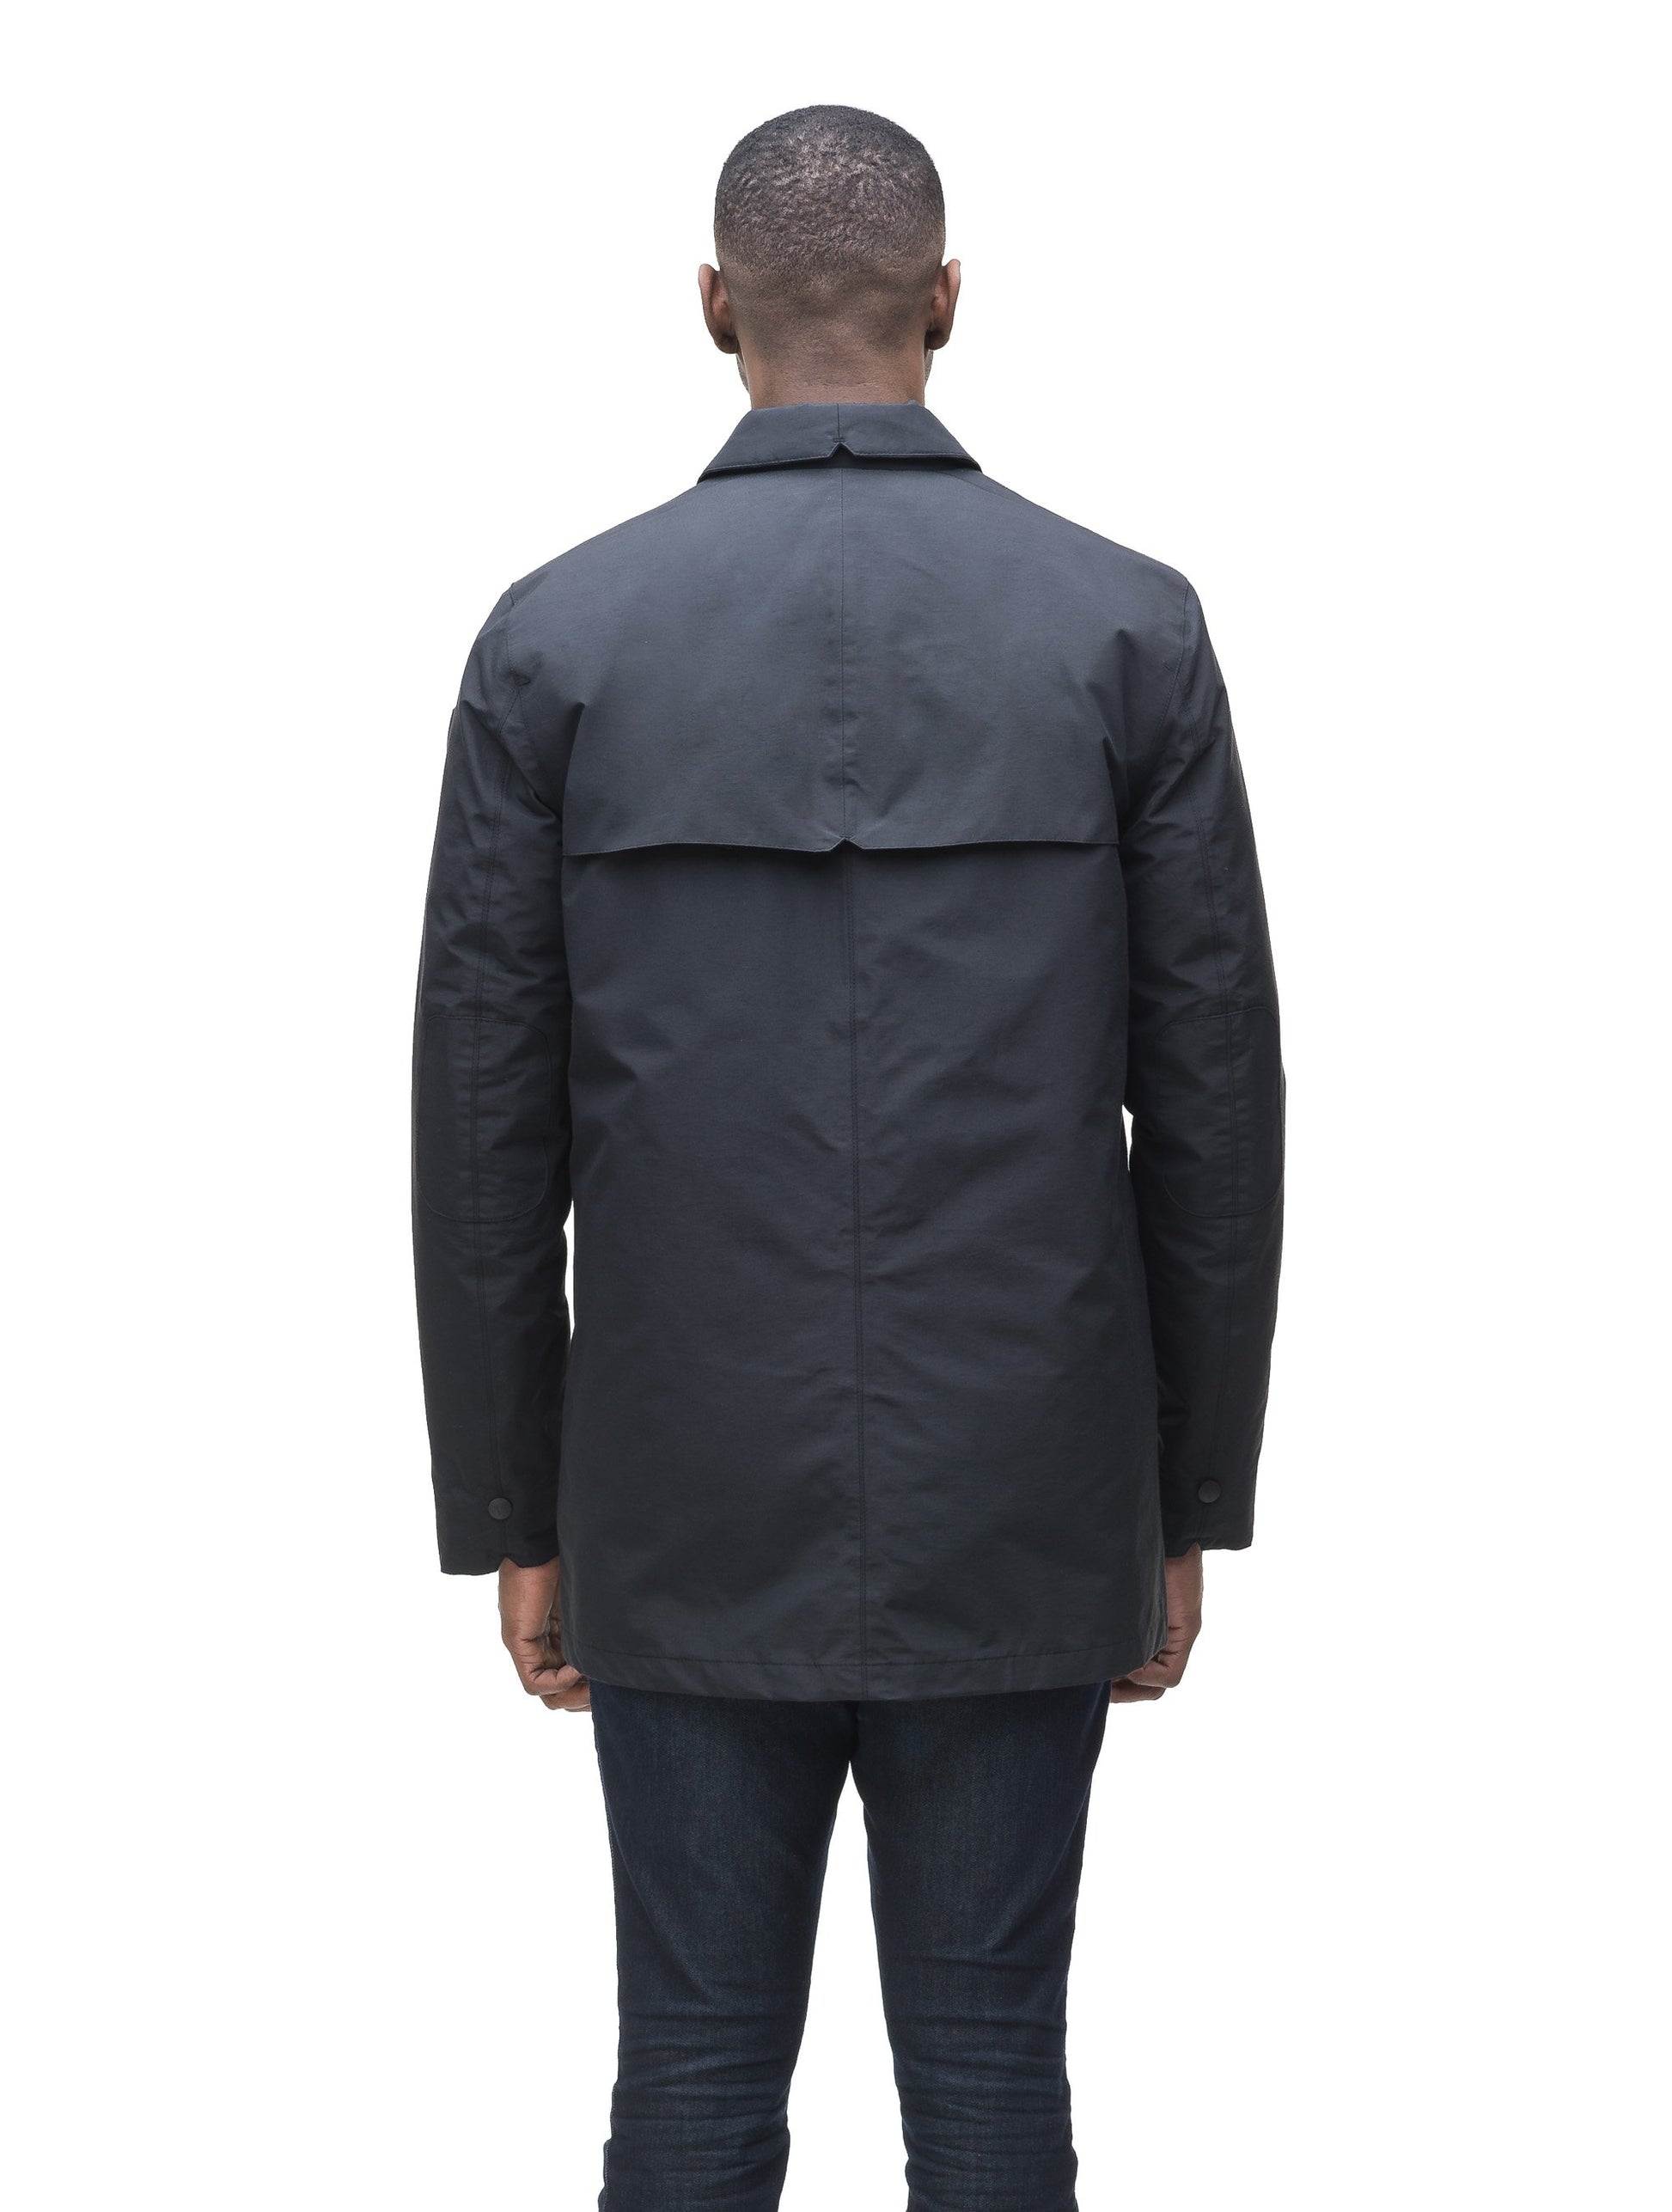 Men's waist length raincoat with a magnetic placket and top button detail in Navy